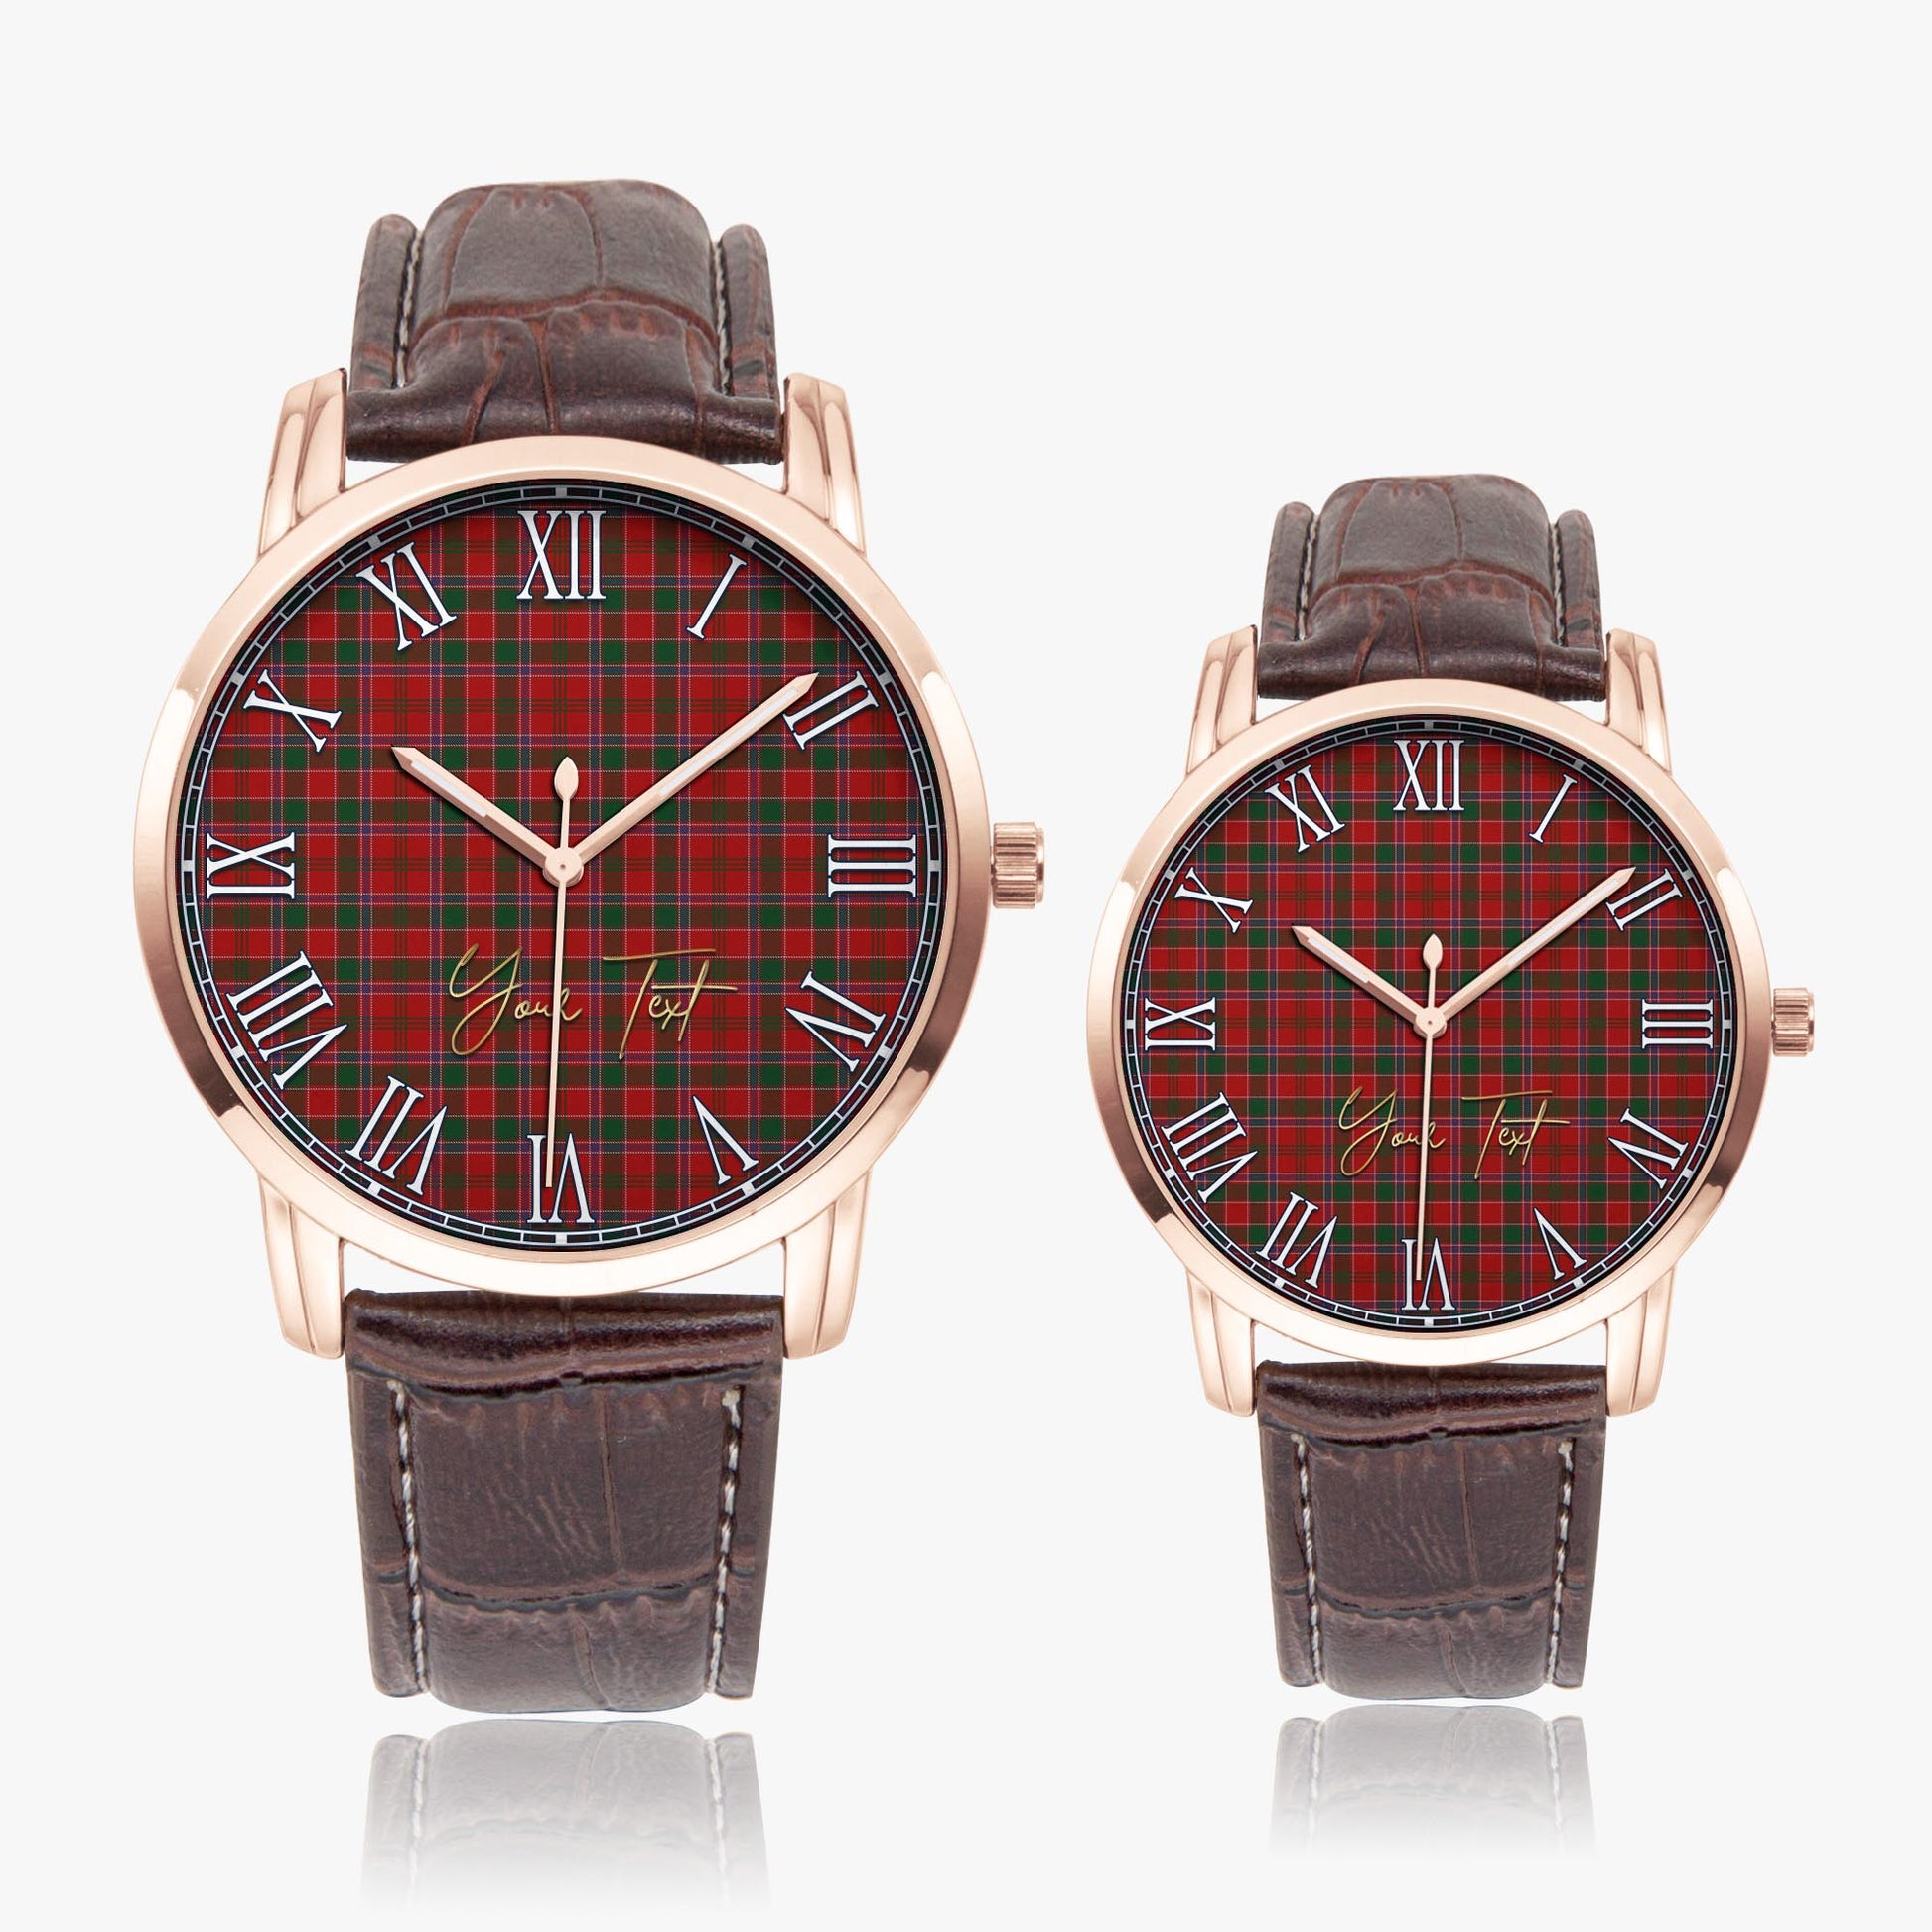 Dalzell (Dalziel) Tartan Personalized Your Text Leather Trap Quartz Watch Wide Type Rose Gold Case With Brown Leather Strap - Tartanvibesclothing